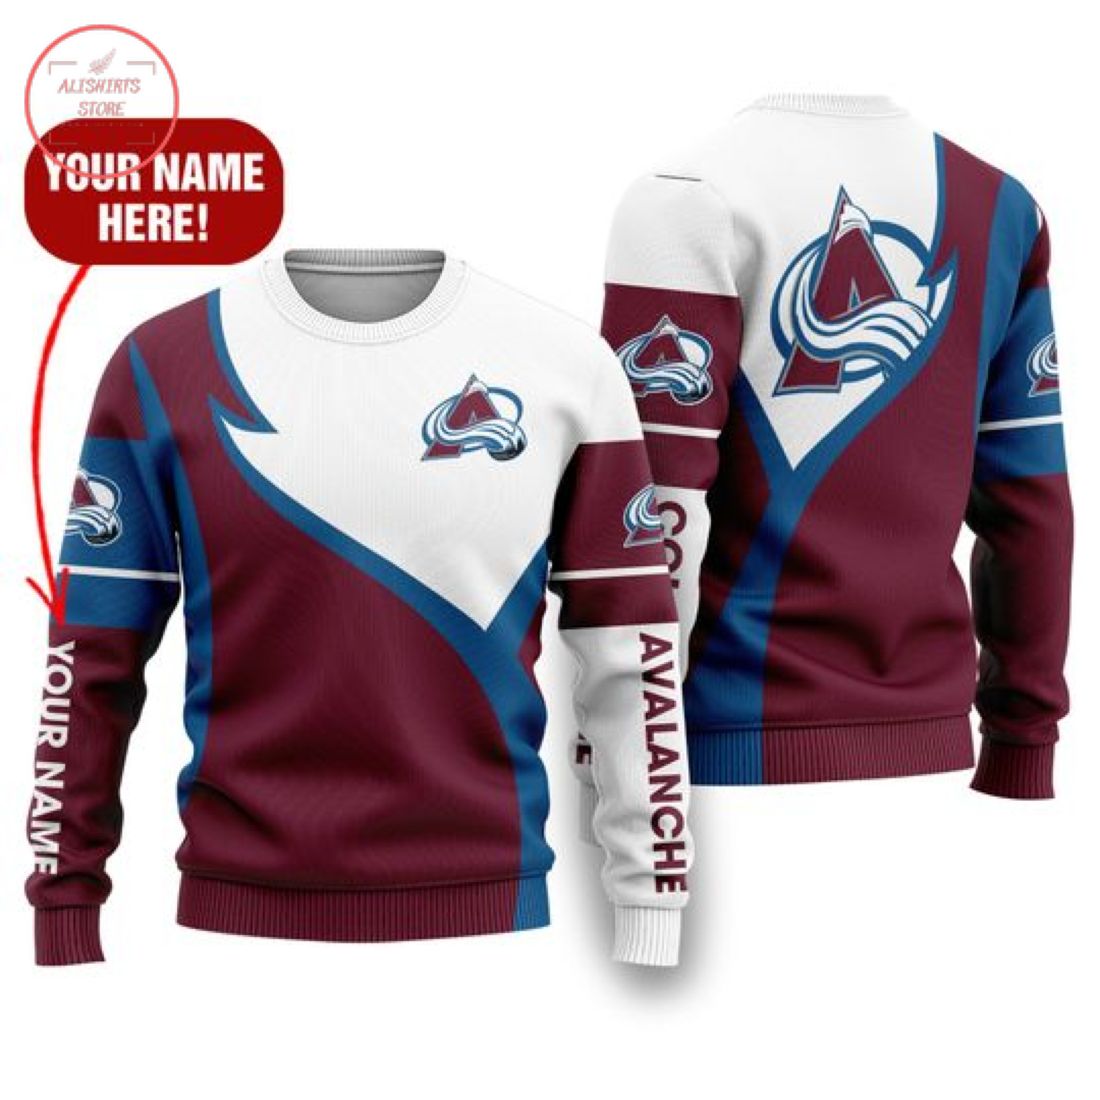 Nhl Colorado Avalanche Personalized Shirts